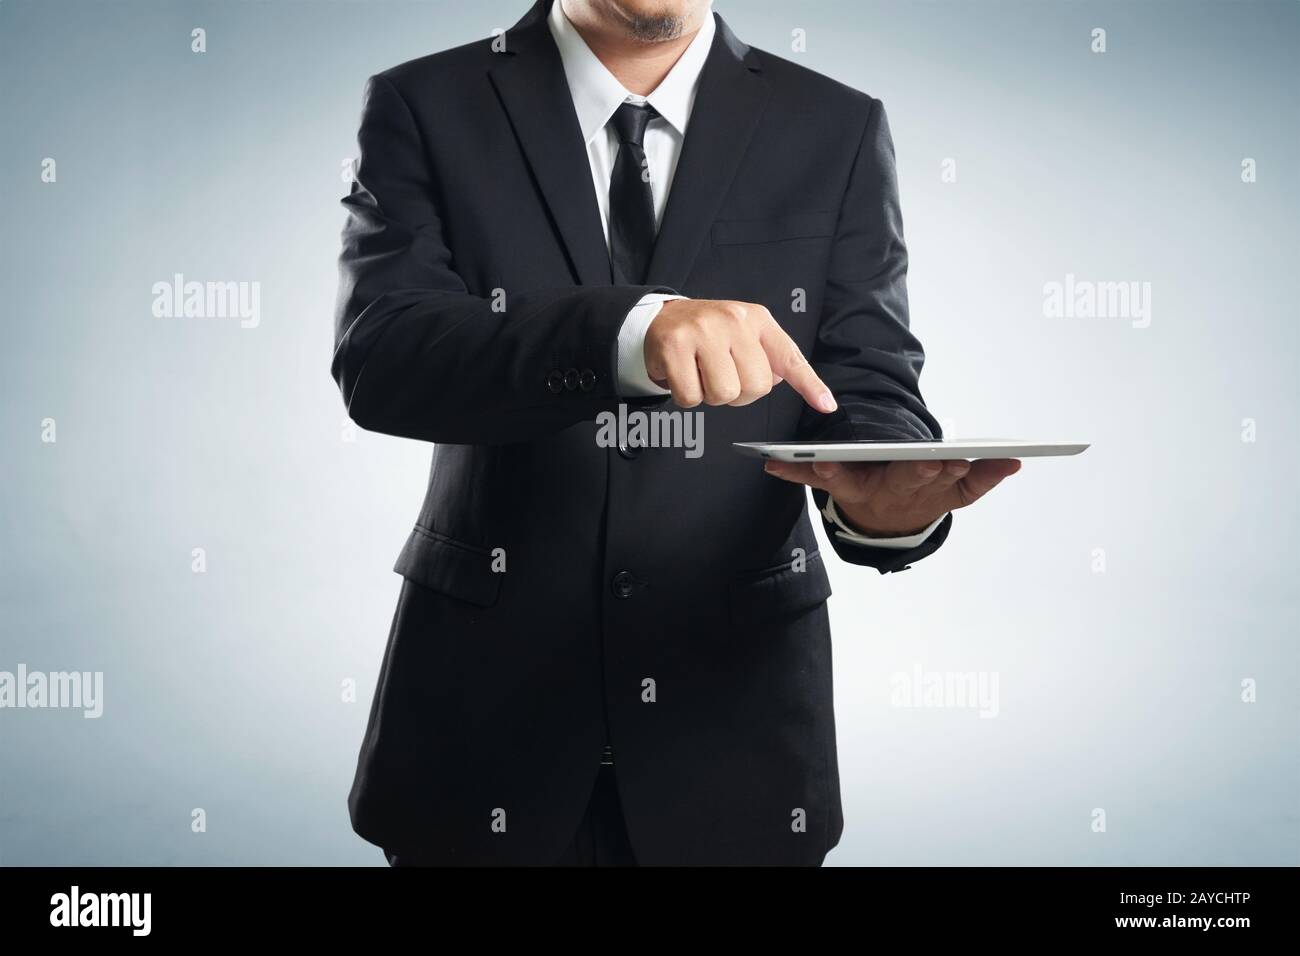 Businessman working on a digital tablet Stock Photo